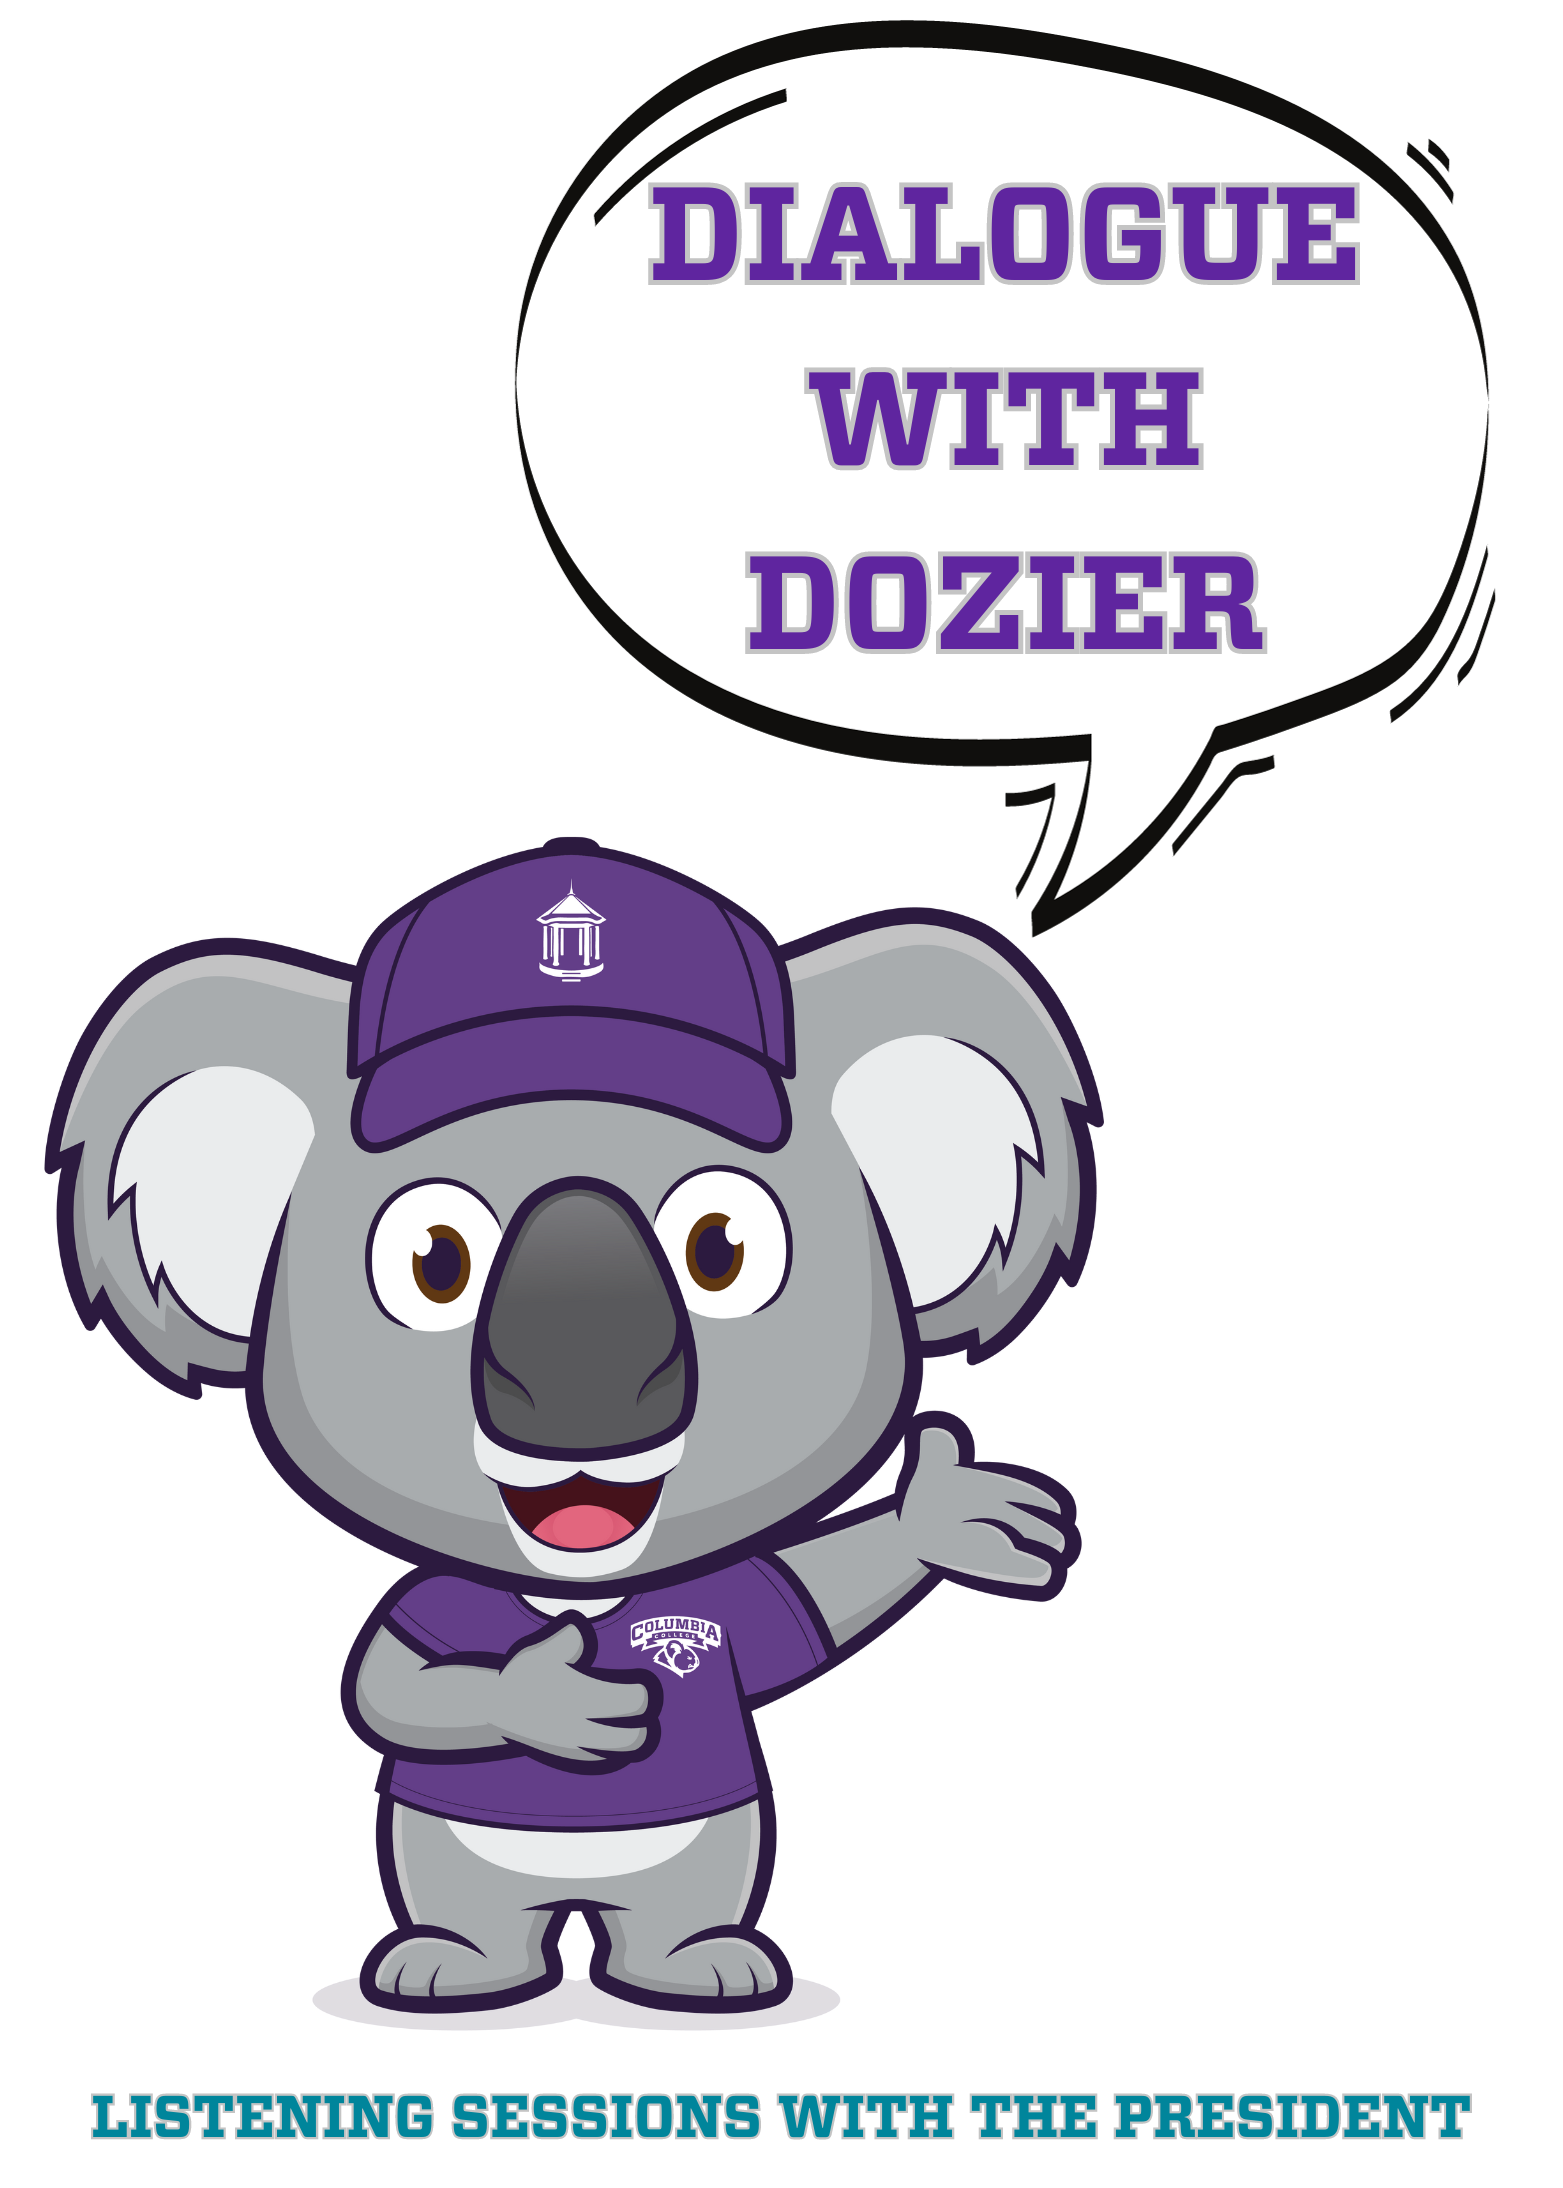 dialogue with dozier headline listening sessions with the president subheading koala speaking and wearing a hat